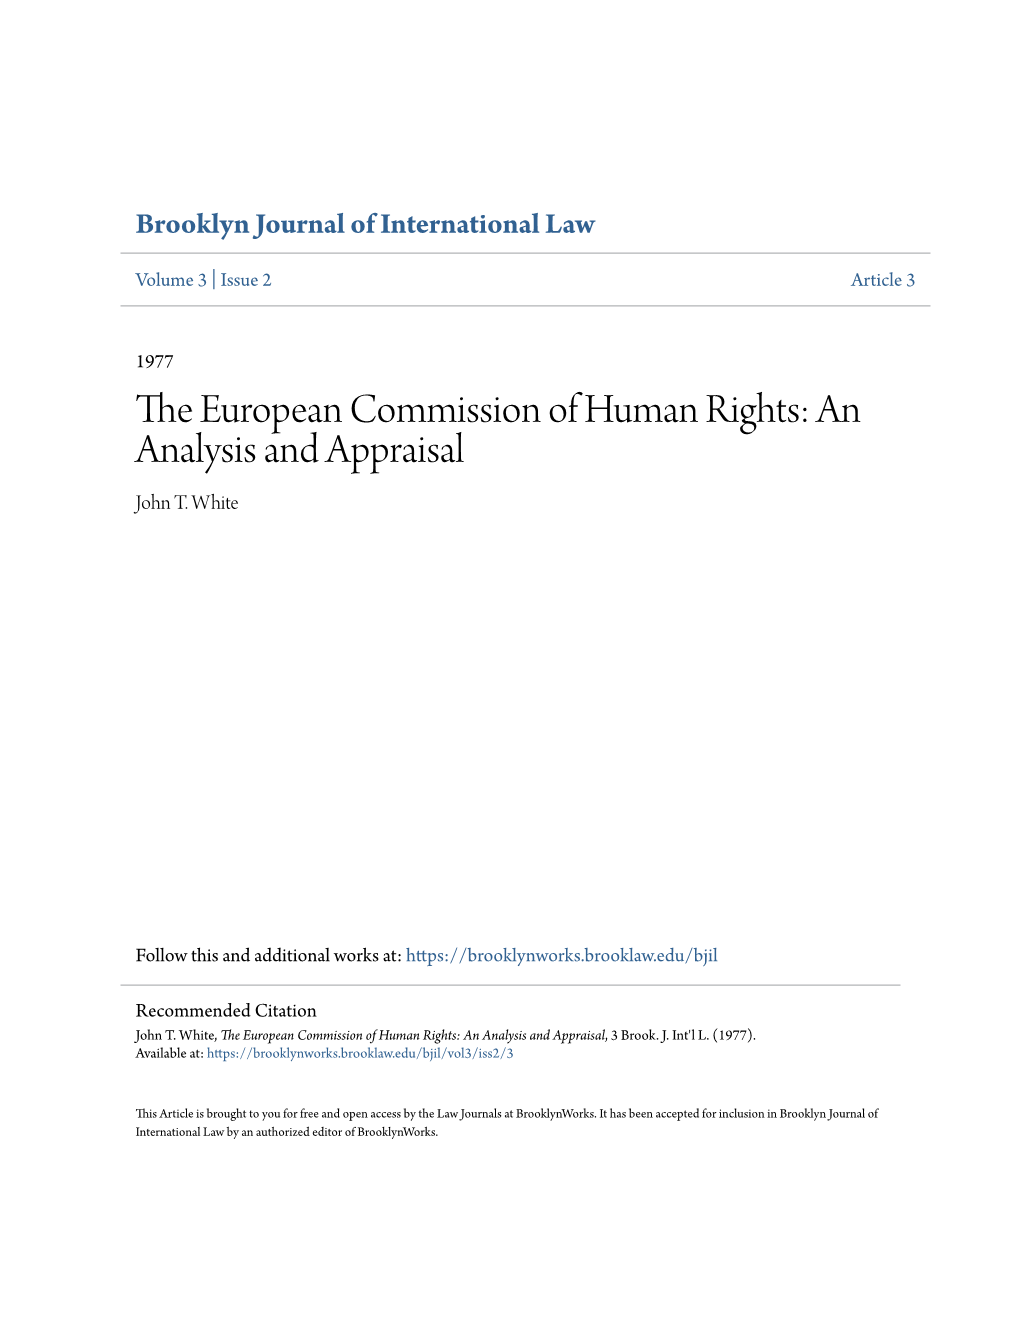 The European Commission of Human Rights: an Analysis and Appraisal, 3 Brook